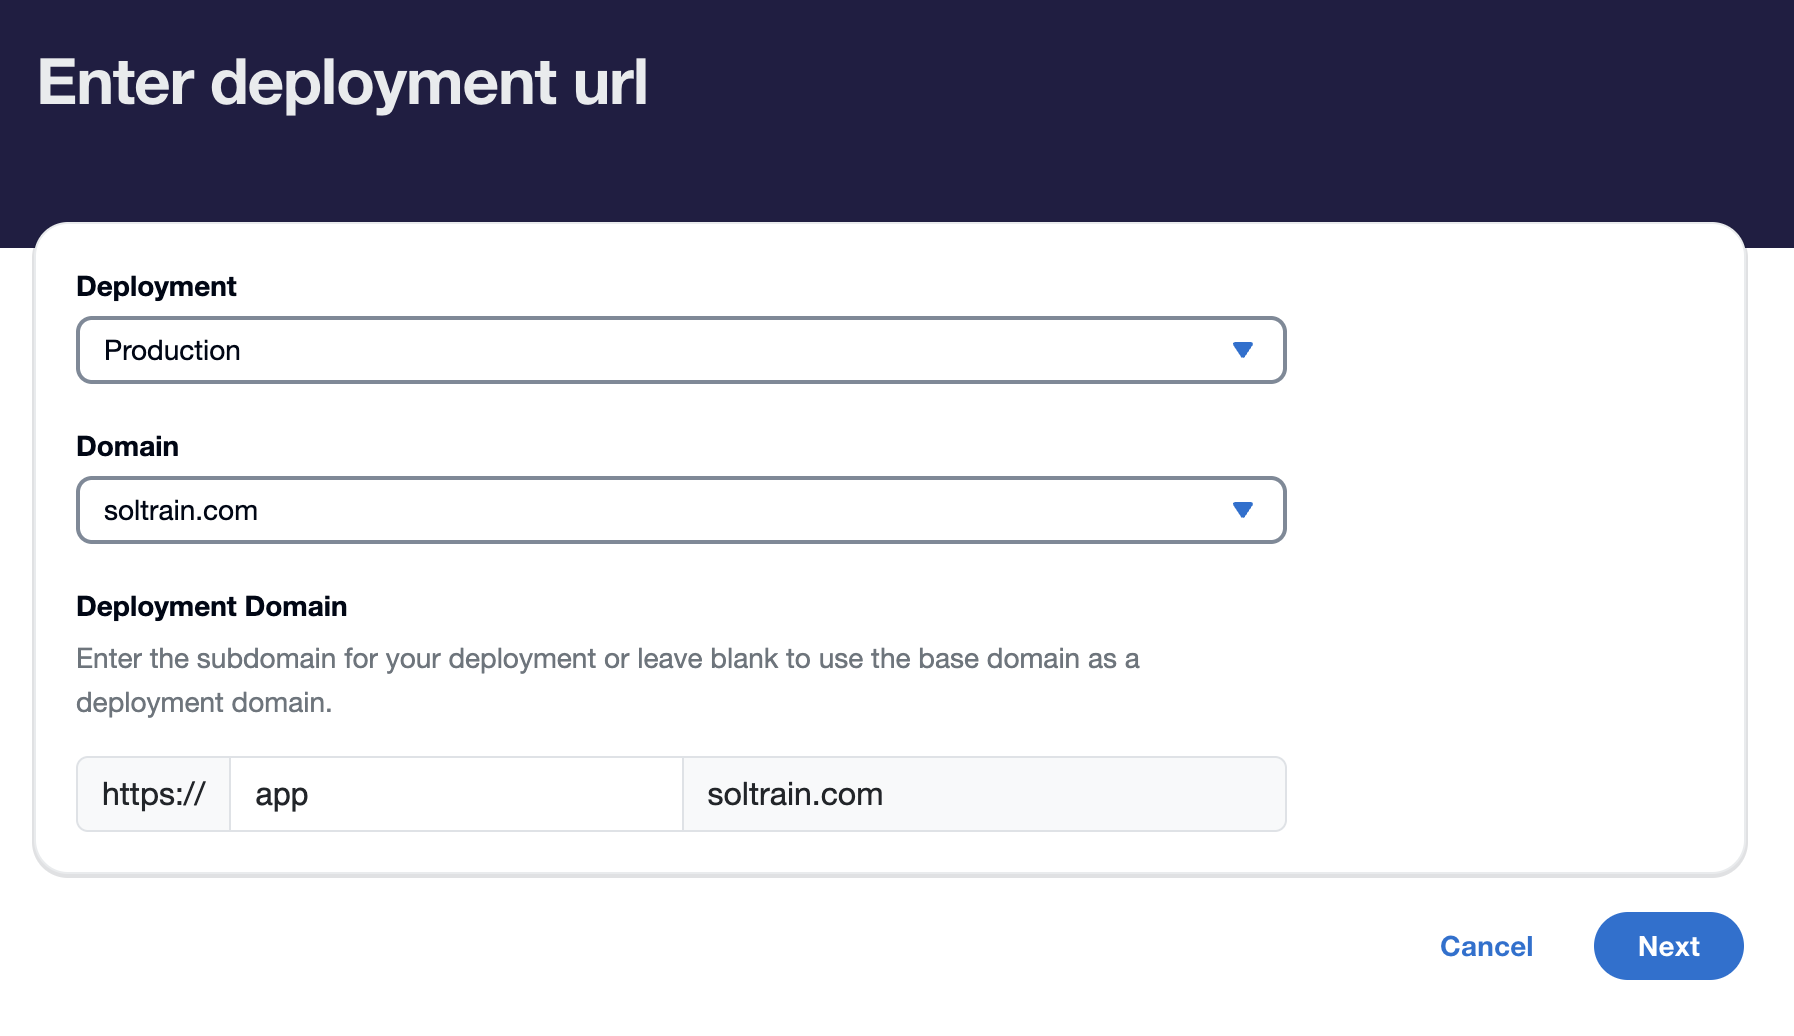 Select a deployment, domain and subdomain